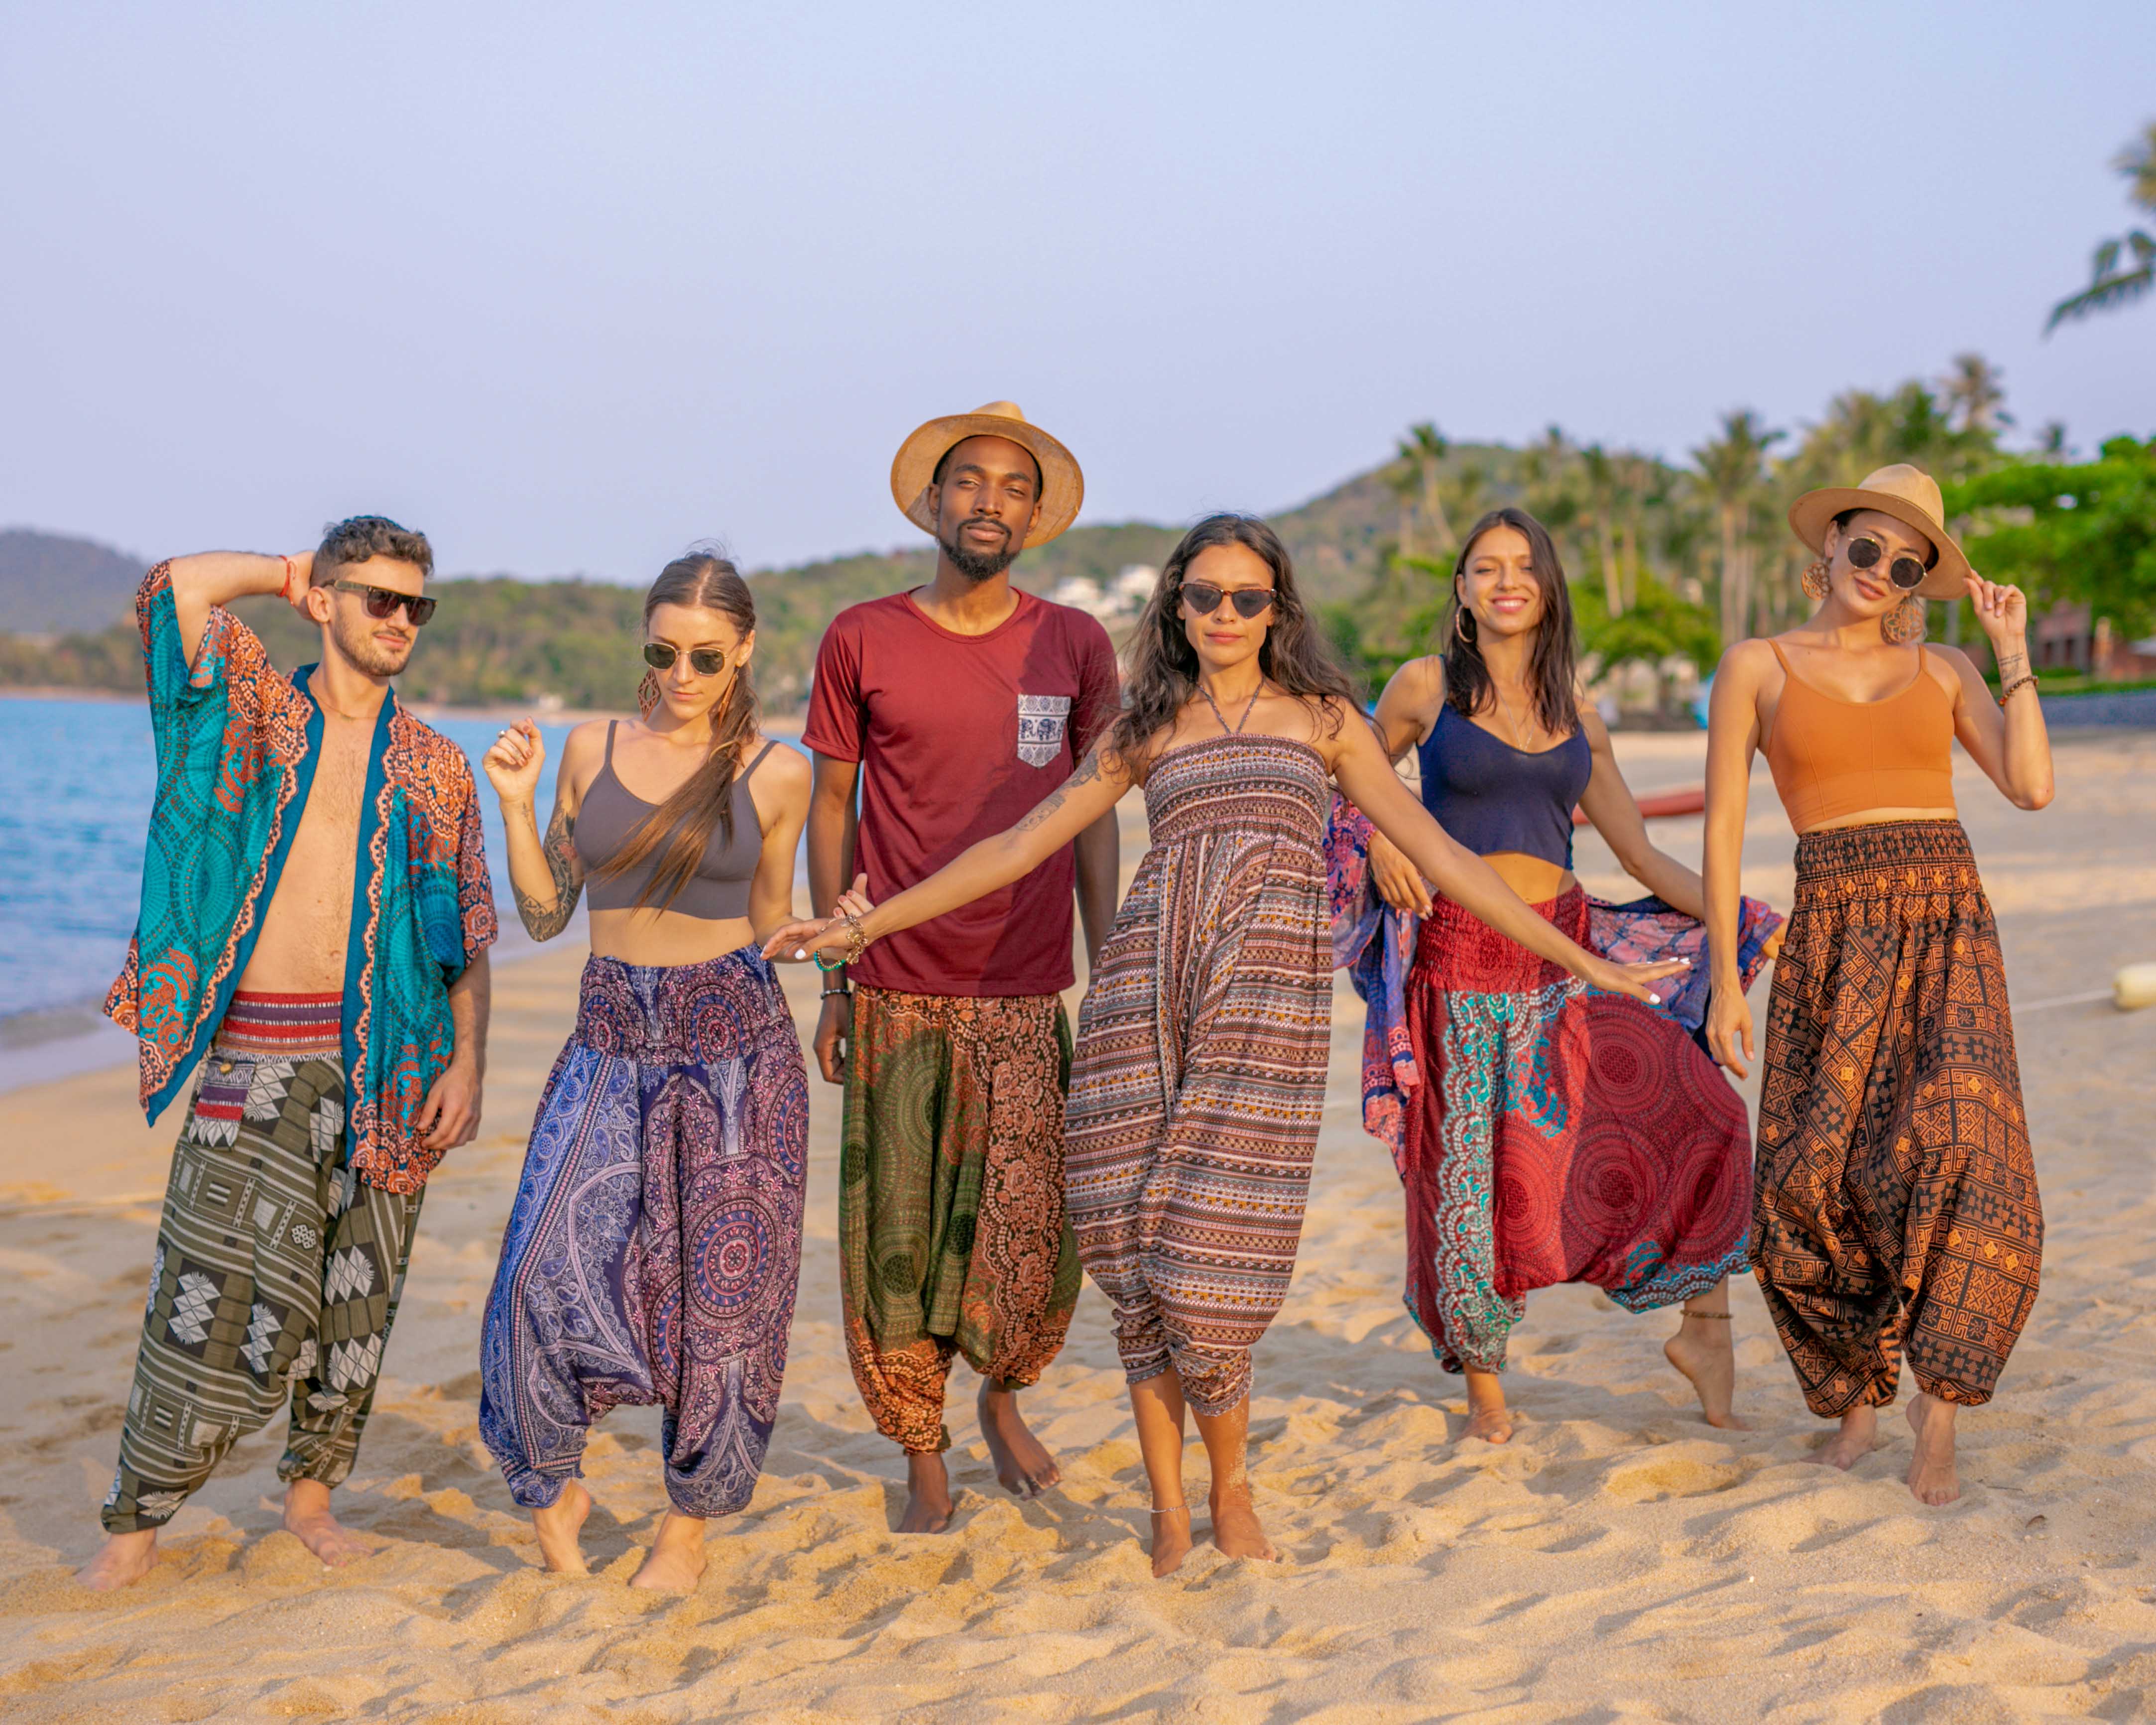 AGRABAH YOGA PANTS Elepanta Yoga | Hippie Pants - Buy Today Elephant Pants Jewelry And Bohemian Clothes Handmade In Thailand Help To Save The Elephants FairTrade And Vegan